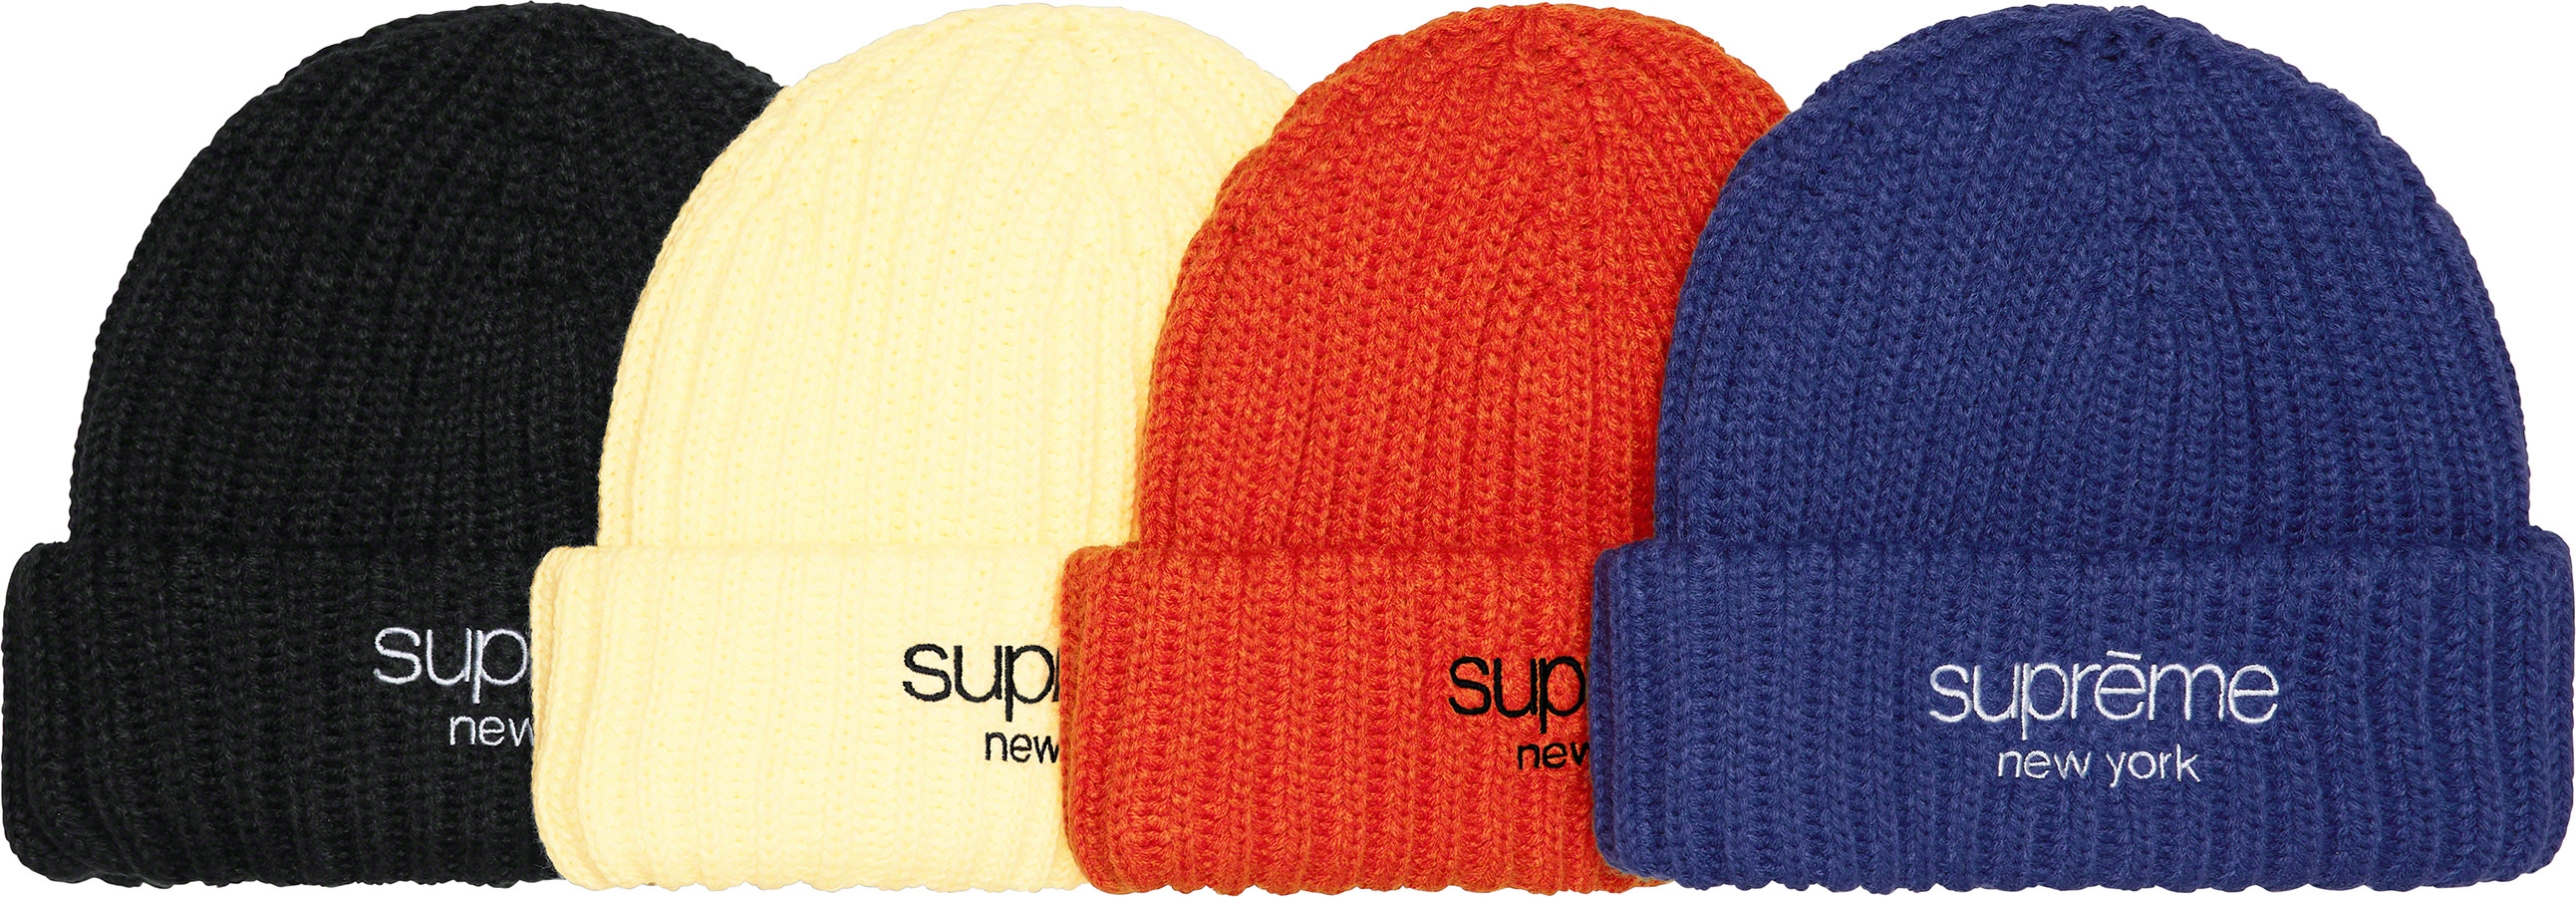 Now available in store! Brand new Supreme beanies prices from $60